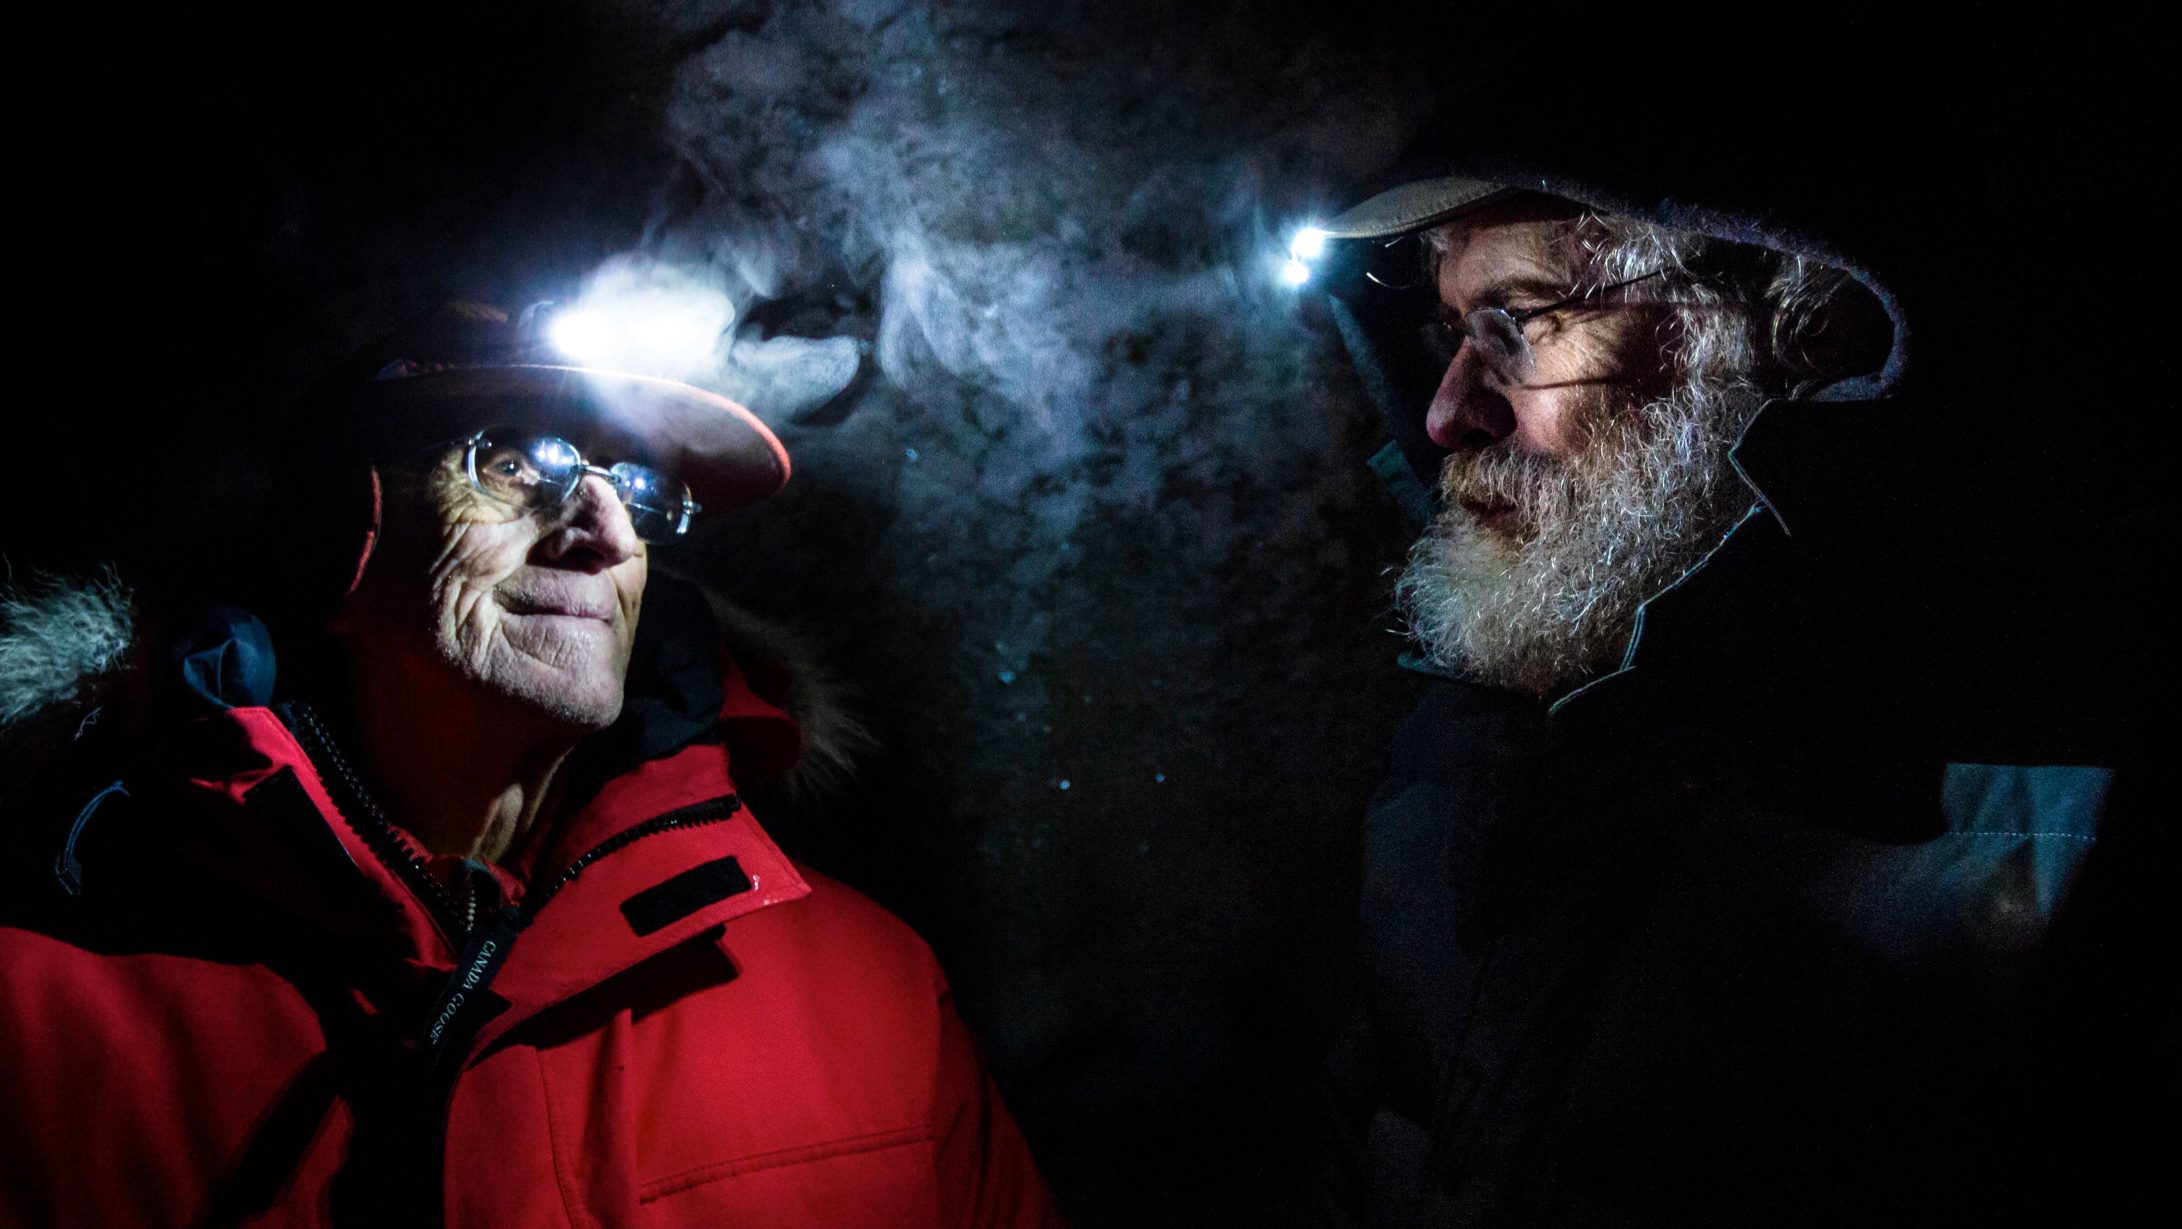 Stewart Brand and George Church explore an ice tunnel in Siberia’s permafrost.